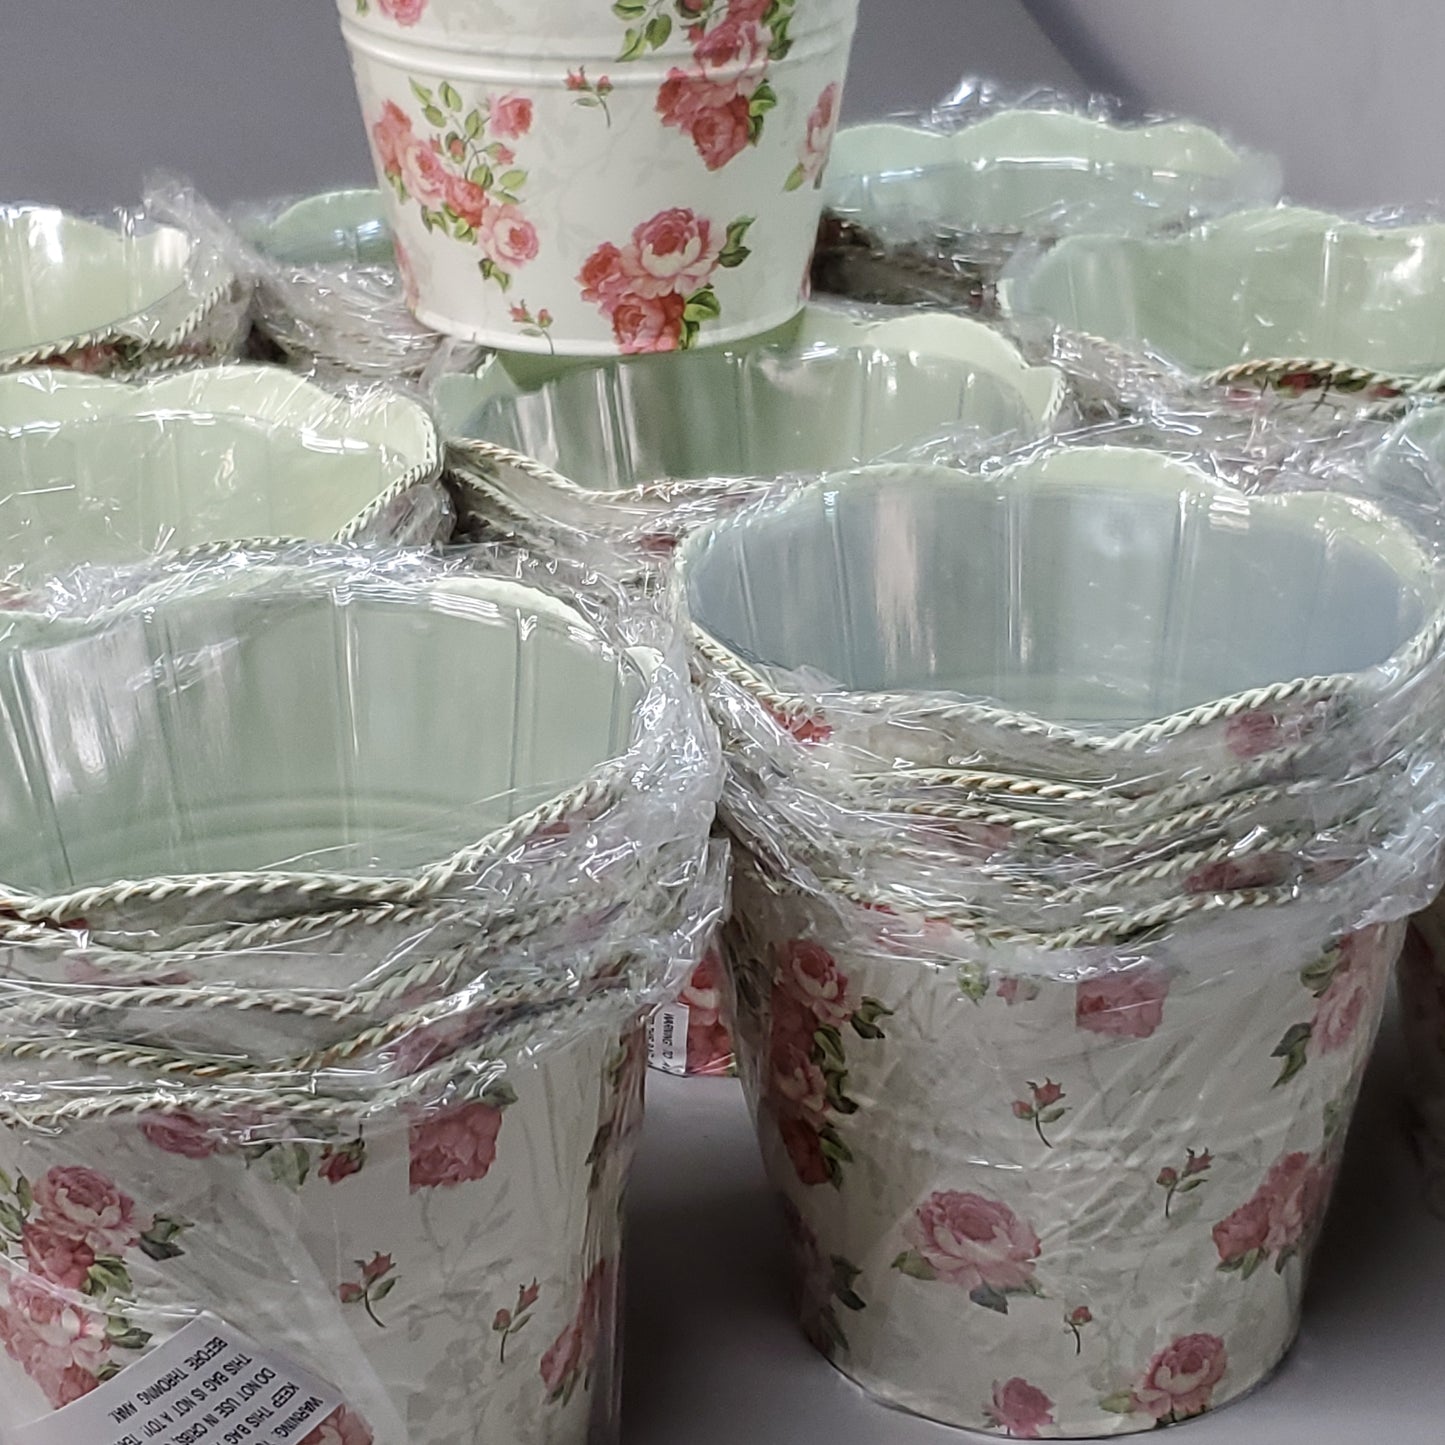 1800FLOWERS 45 Pack Of Damask Metal Buckets/Cans Pink Rose W/ Liners 6” 79232 (New)